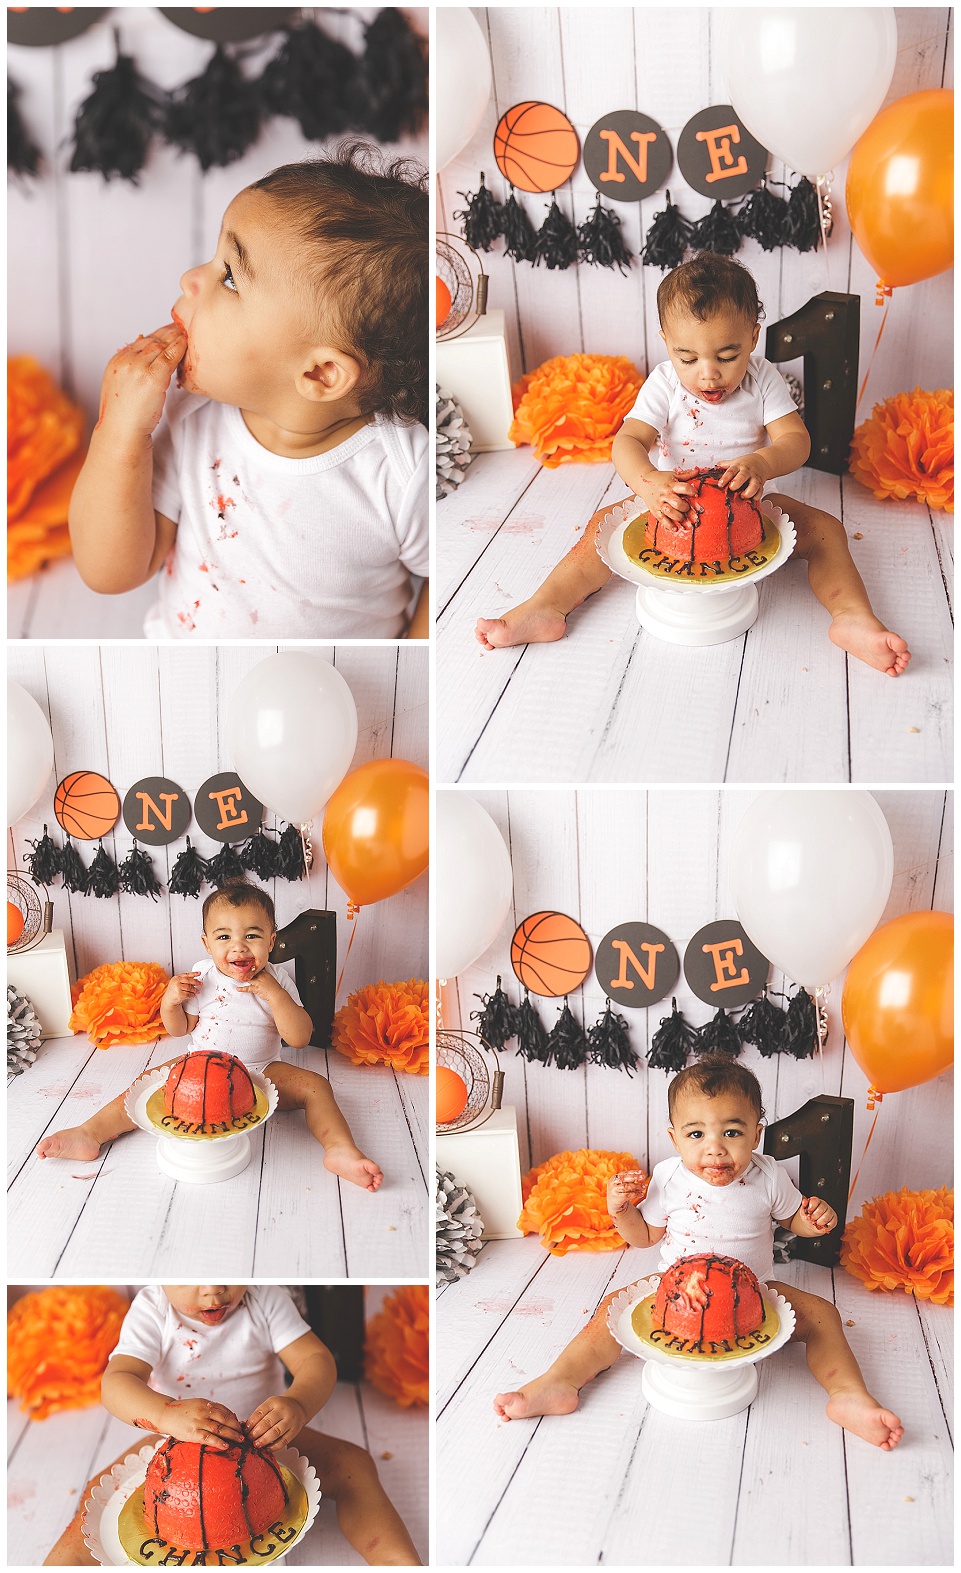 white, black and orange basketball themed cake smashe for one year old boy, wearing a white onesie 